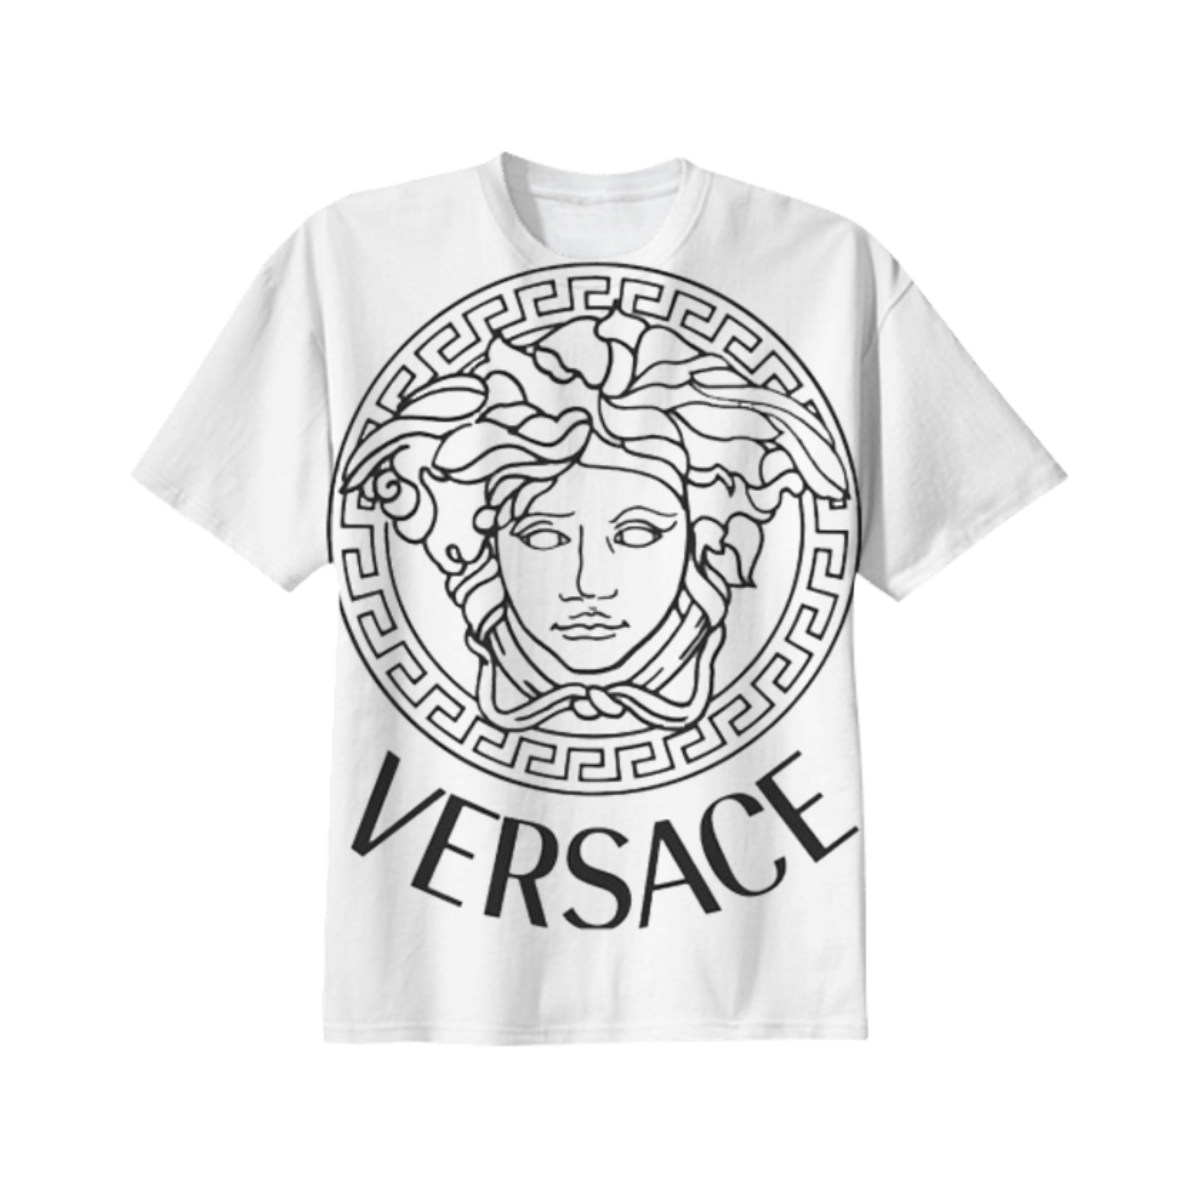 Download 00 Design By Itsvolume - Versace Logo PNG Image with No ...